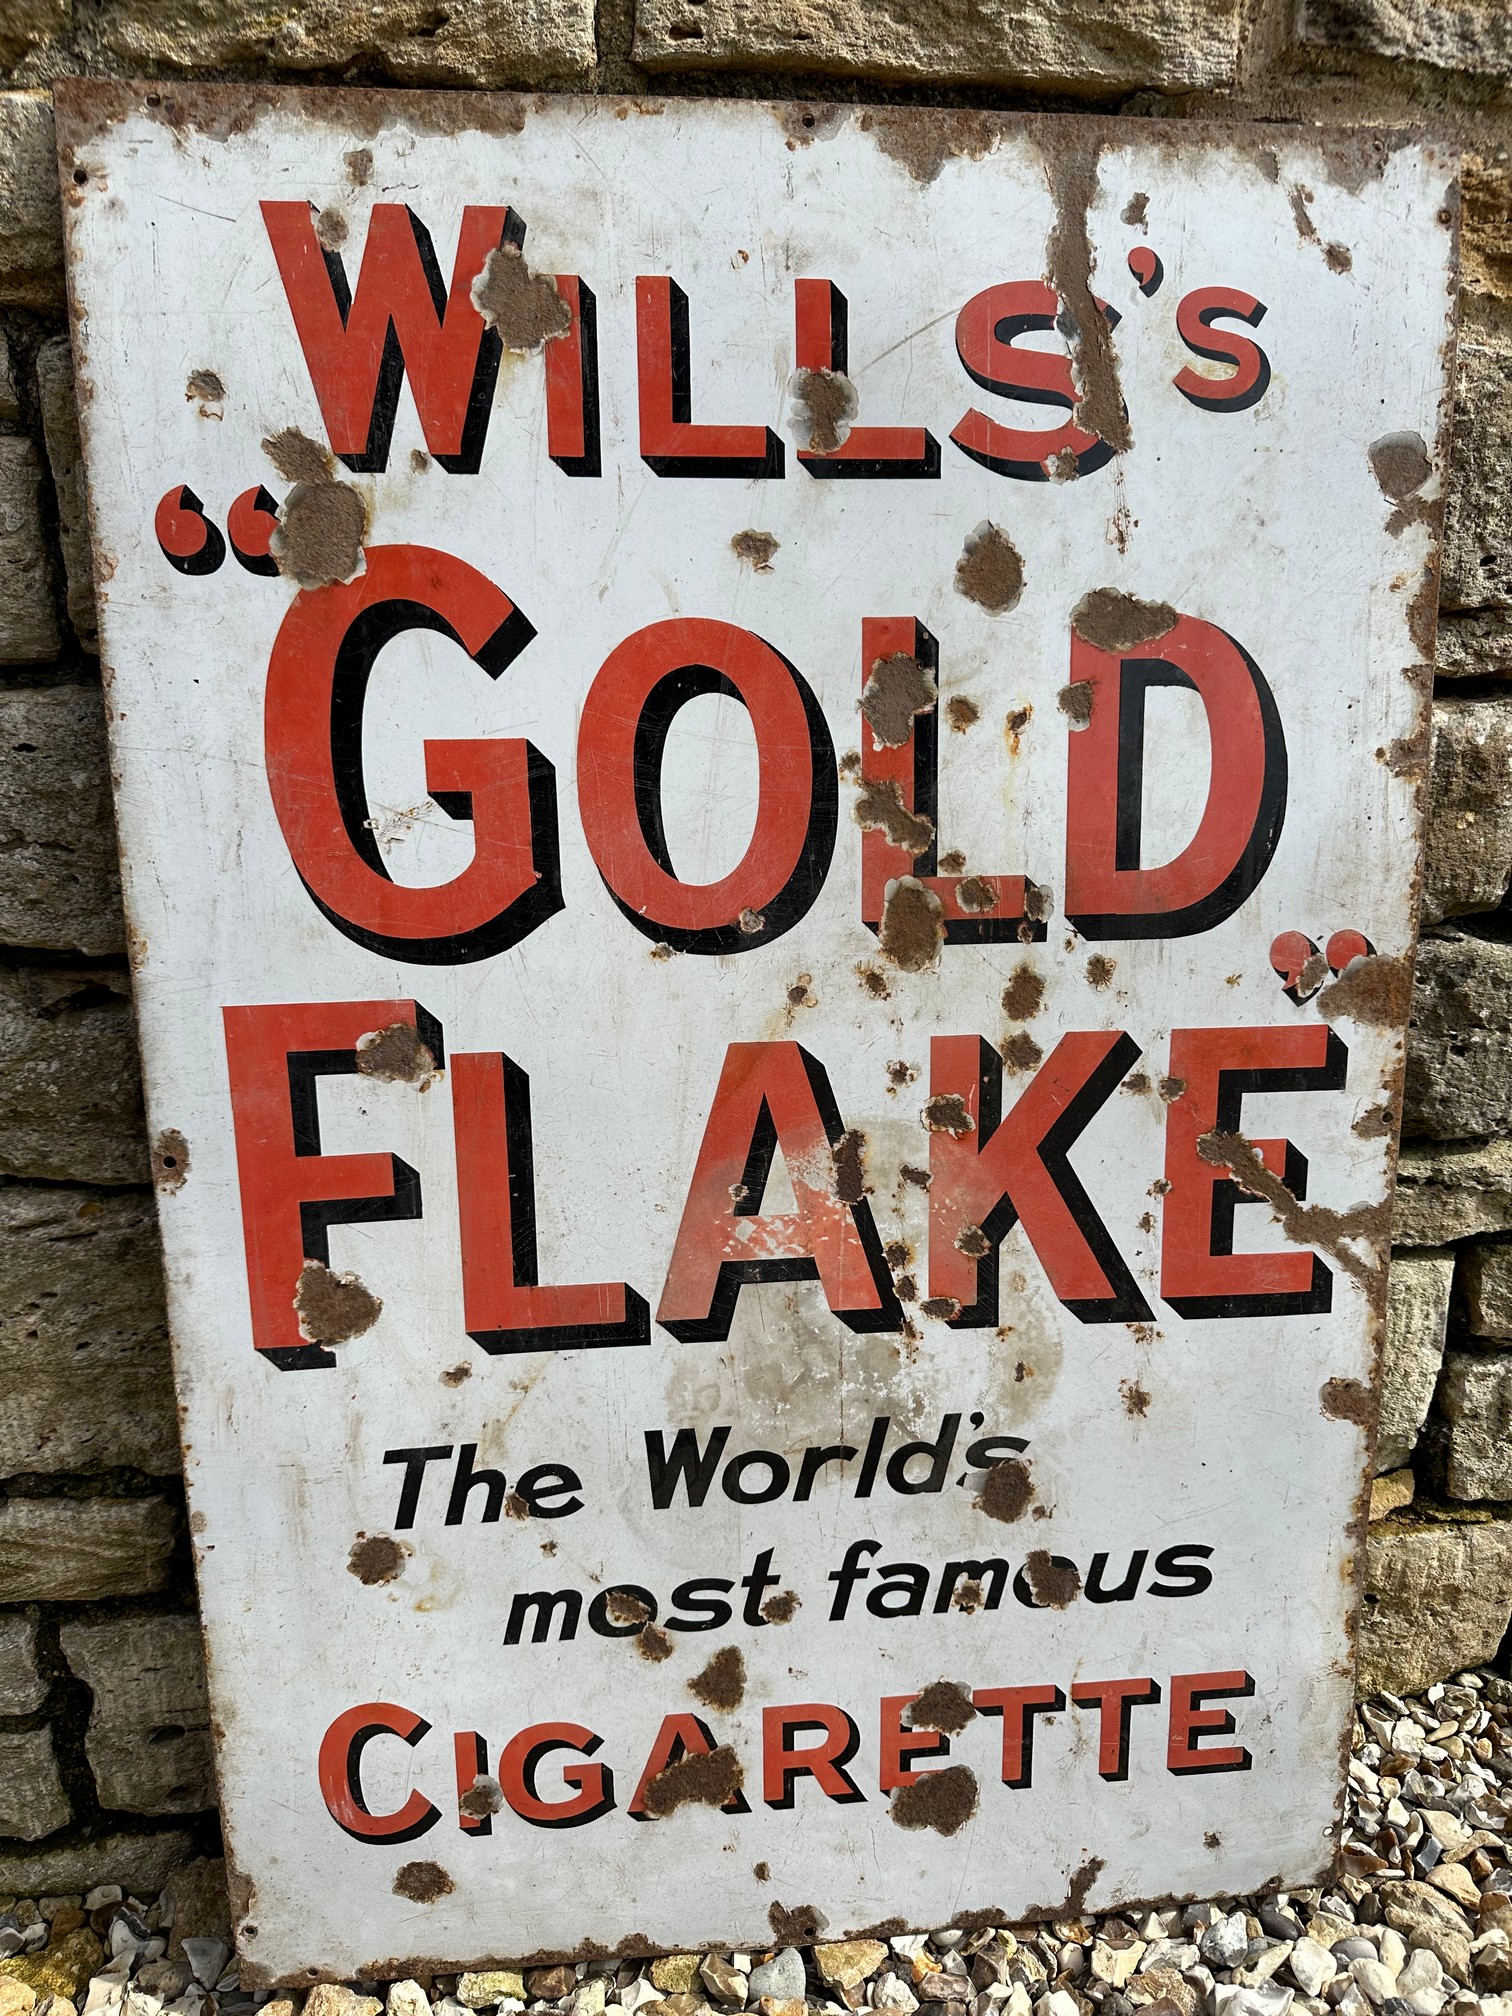 A Wills's "Gold Flake" The World's most famous Cigarette enamel advertising sign, 24 x 36".